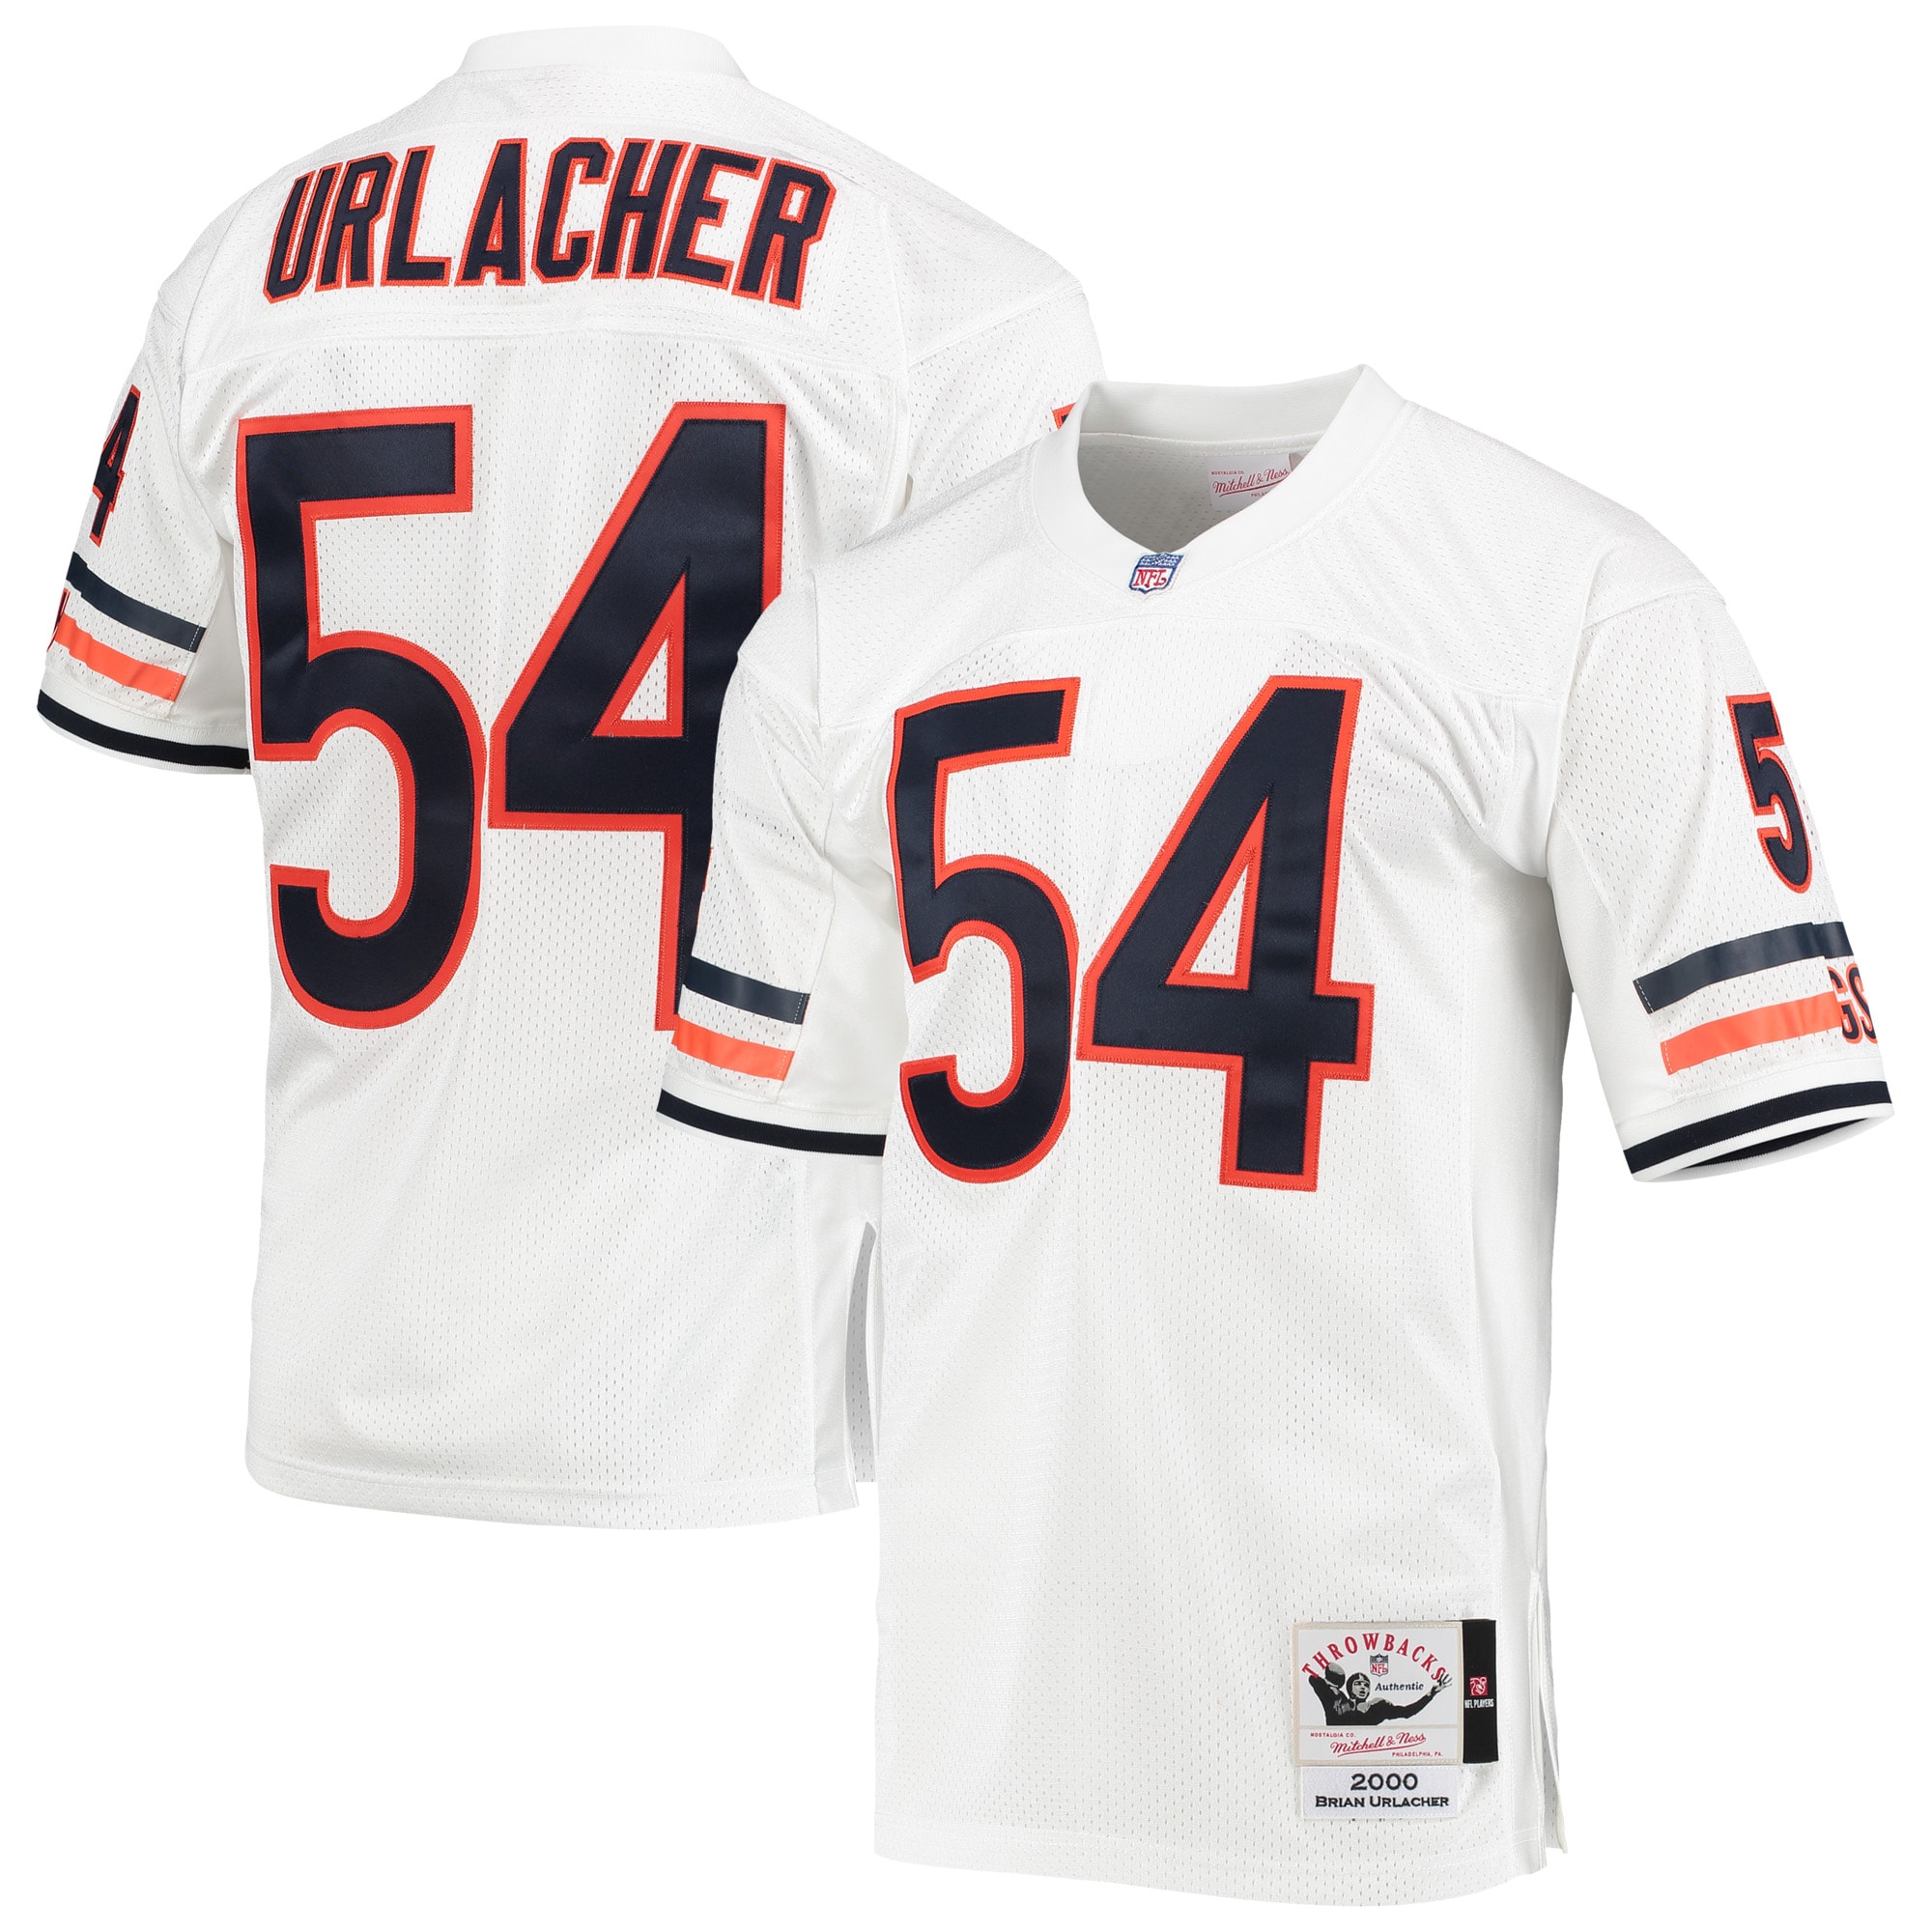 Men's Chicago Bears Jerseys White Brian Urlacher 2000 Authentic Throwback Retired Player Style